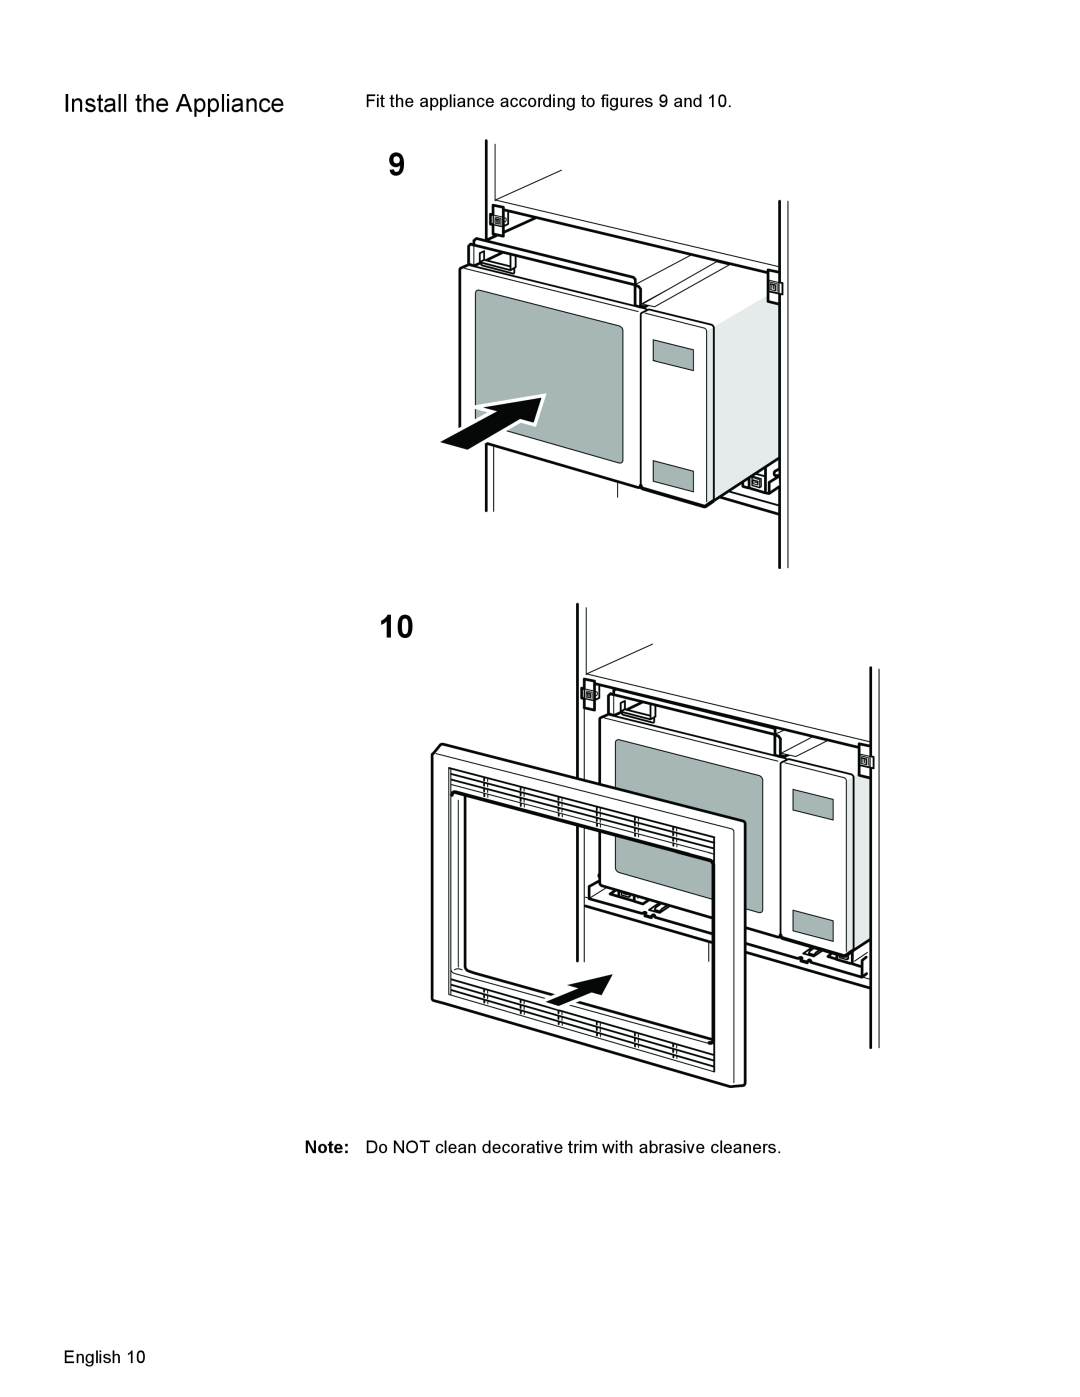 Thermador MCT27E, MCT30E installation manual Install the Appliance, Fit the appliance according to figures 9 and, English 